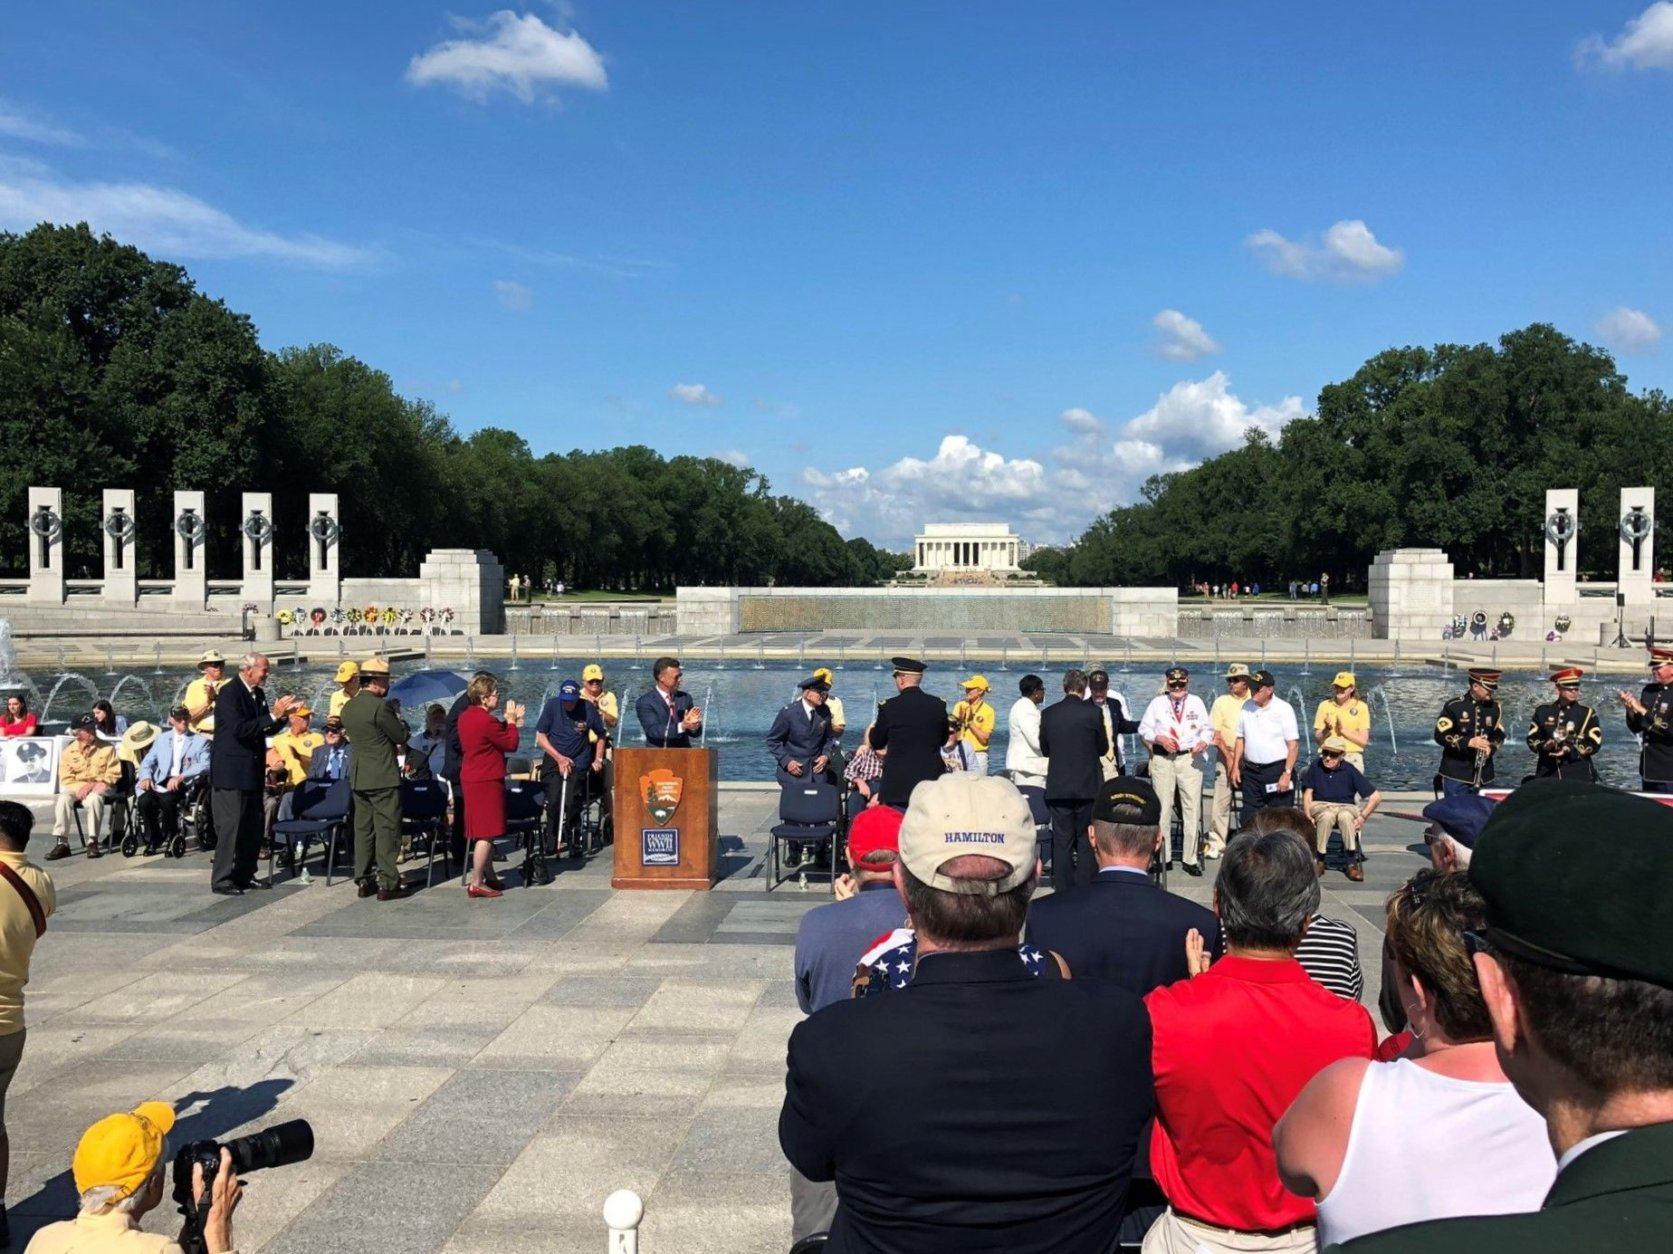 Roaring applause takes place at the World War II Memorial on Monday, May 27, 2019. (WTOP/Keara Dowd)